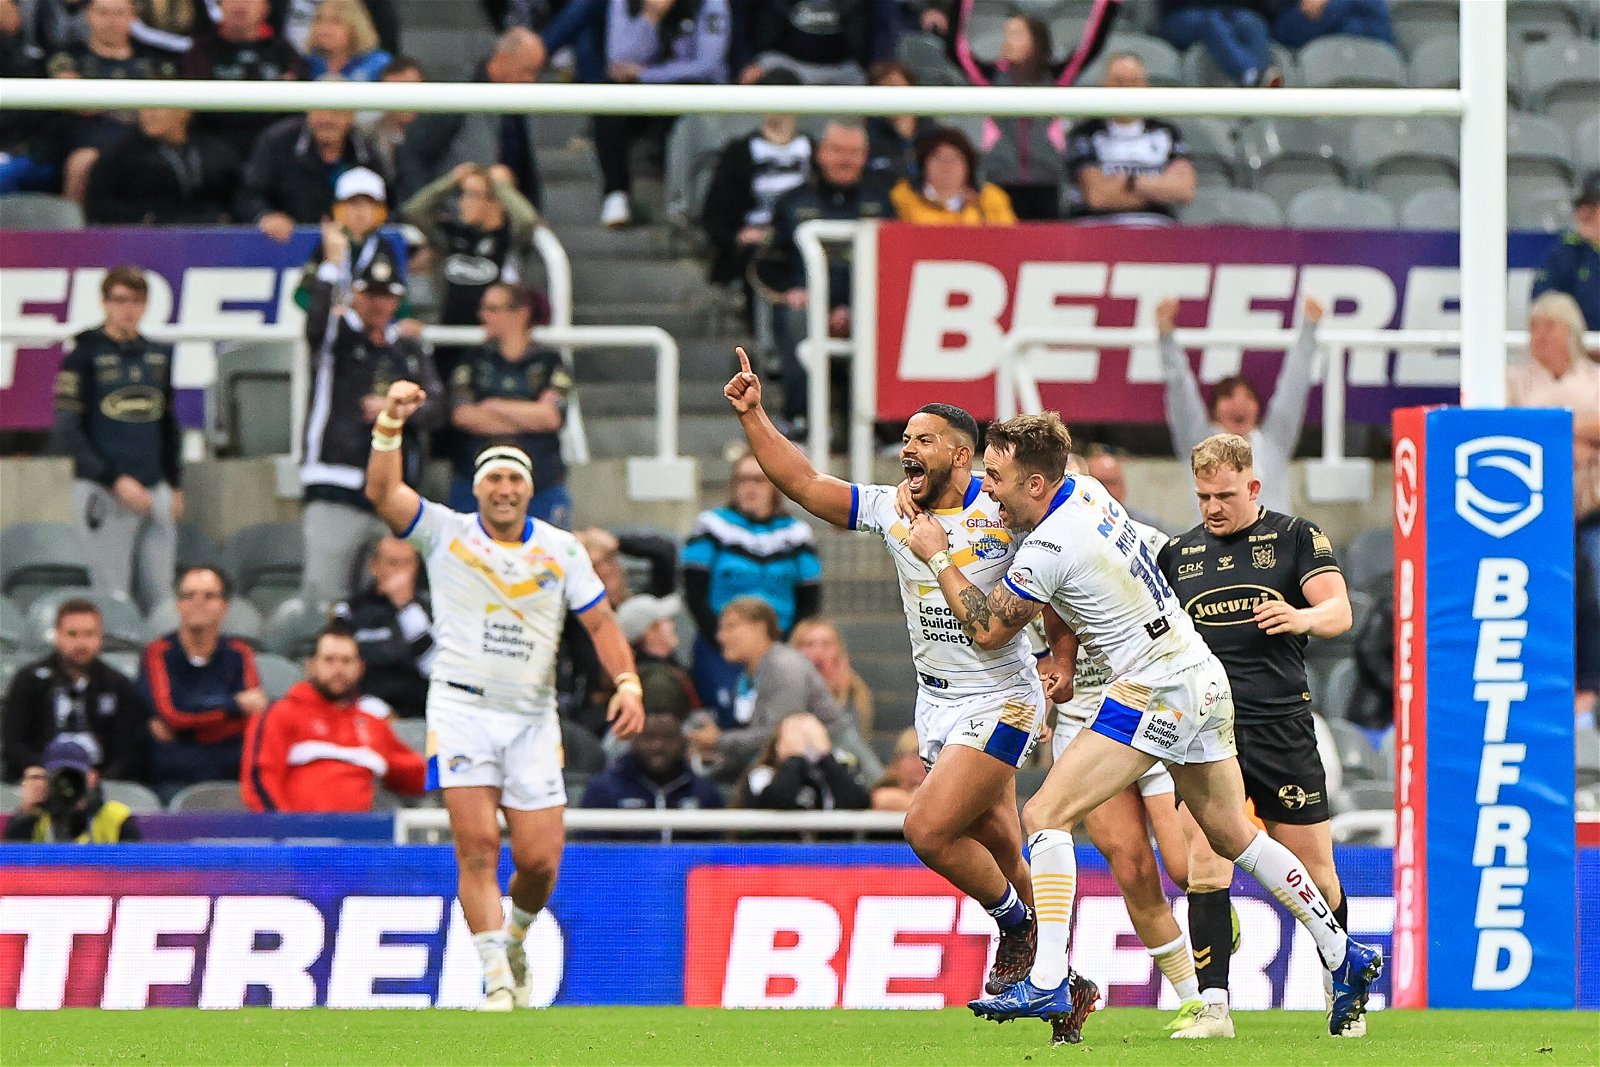 Leeds Rhinos confirm deserving skipper for Featherstone Rovers game